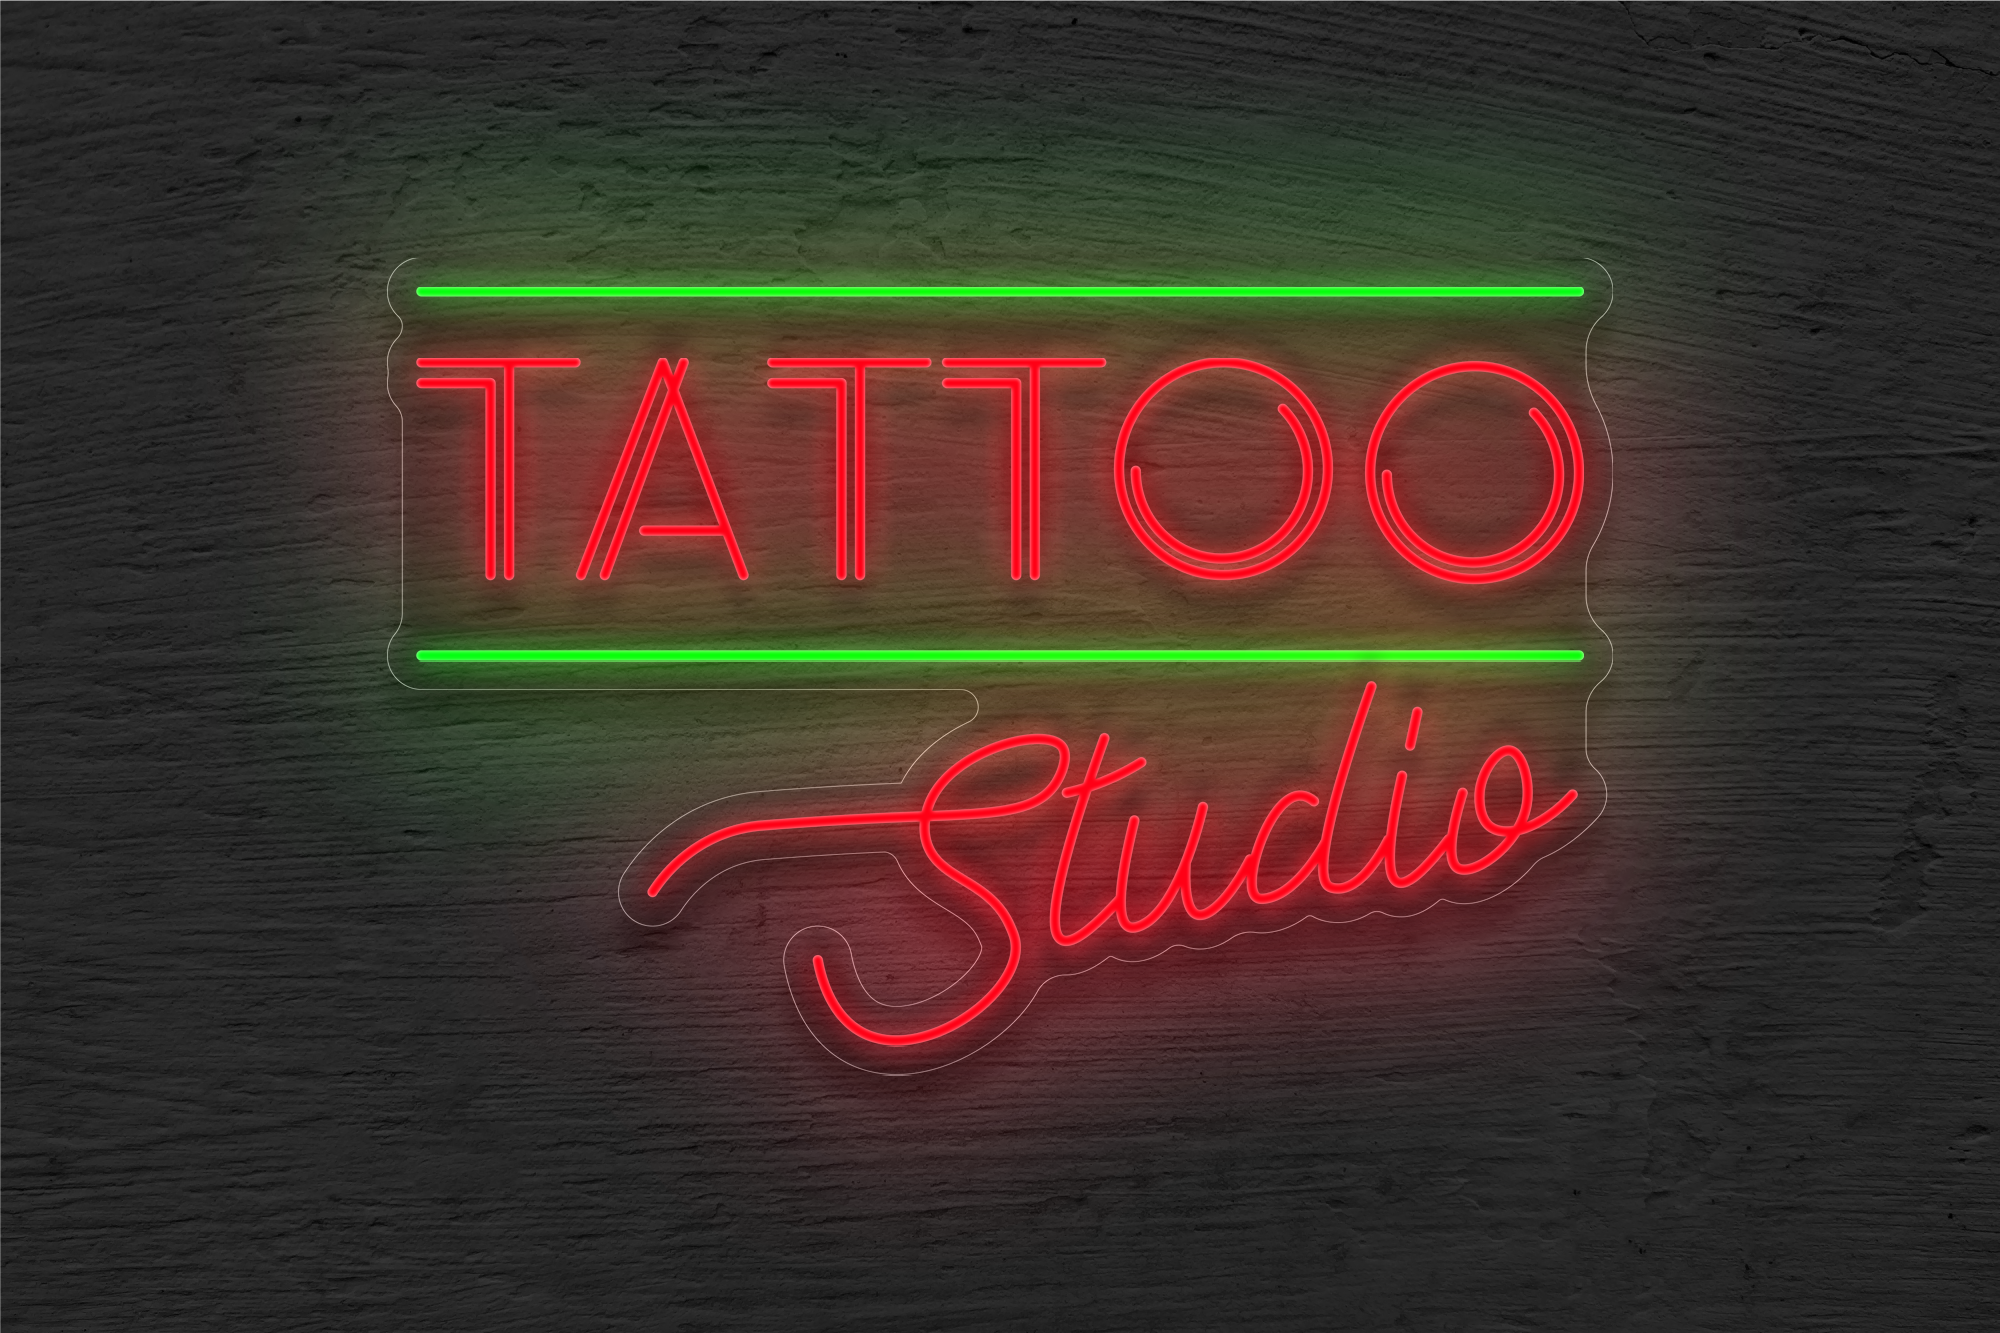 "Tattoo Studio" with 2 Lines LED Neon Sign